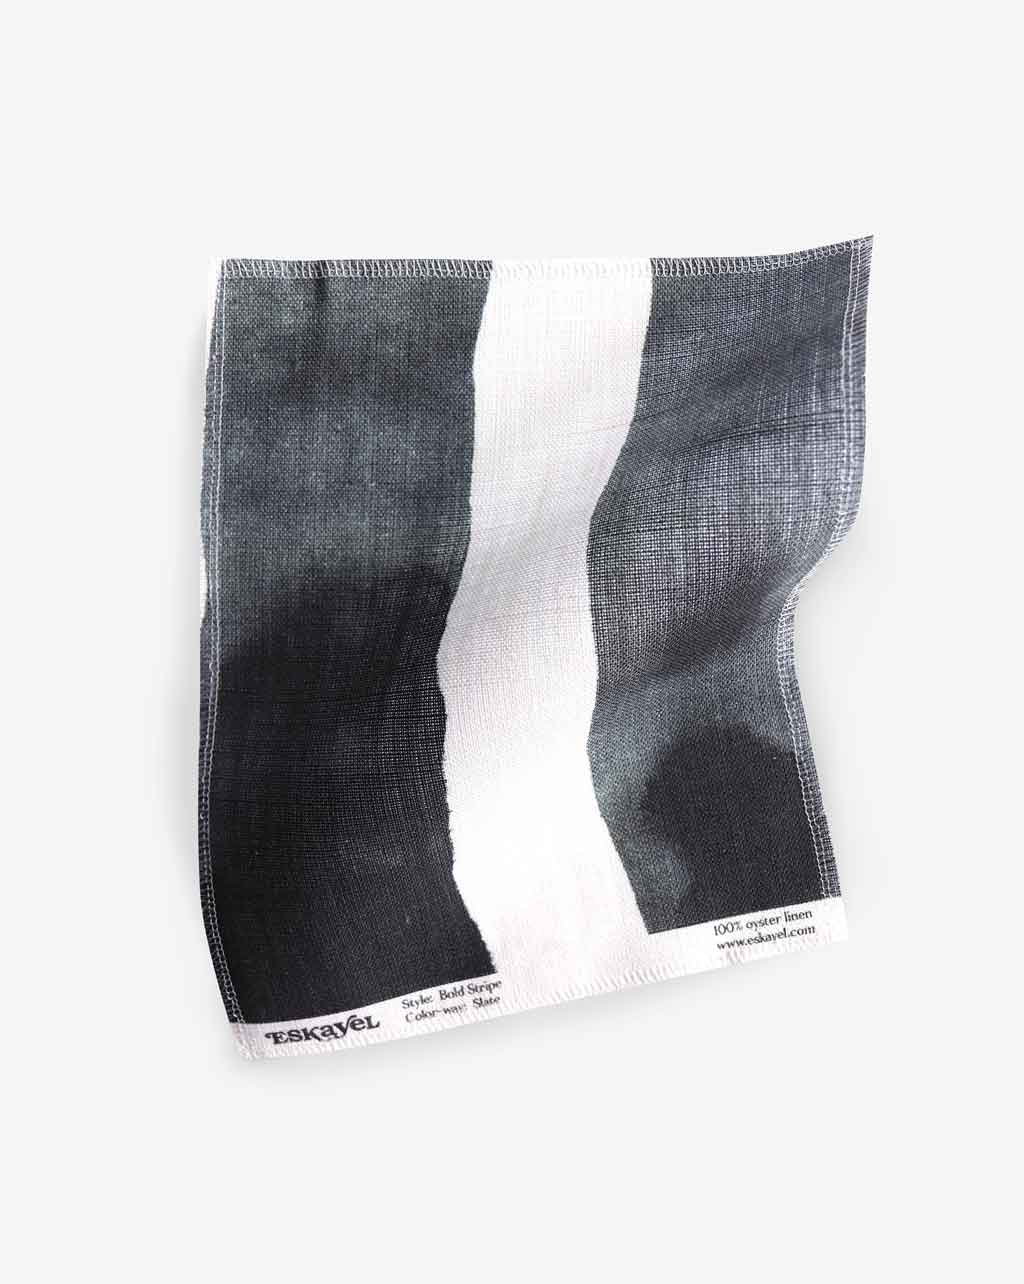 An image of a Bold Stripe Fabric Sample Slate hanging on a white surface